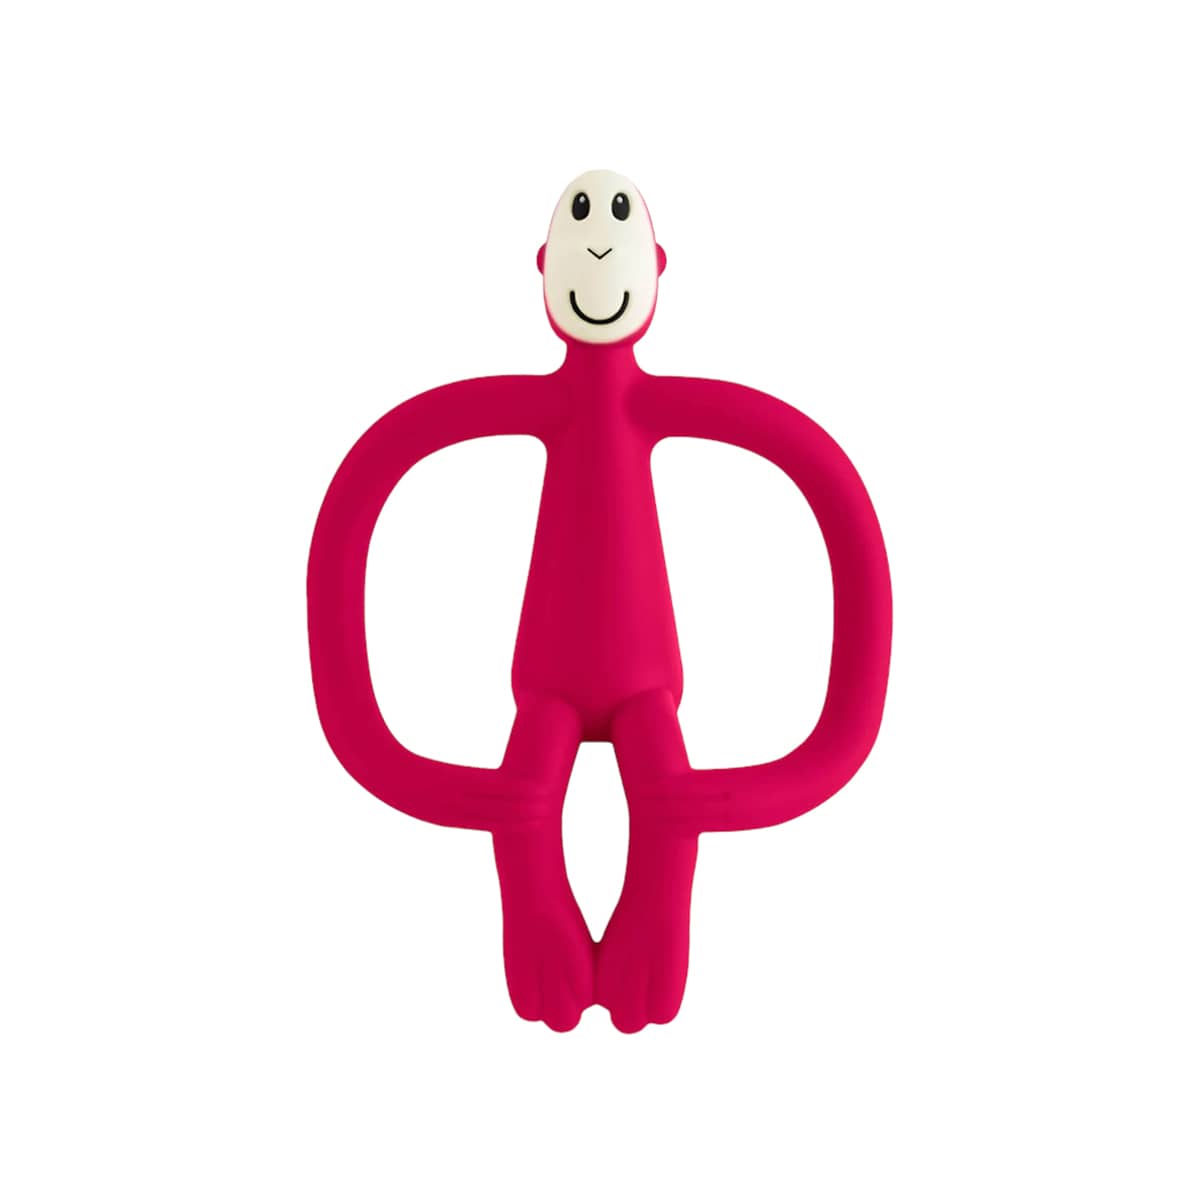 Matchstick Monkey Teething Toy and Gel Applicator - Red